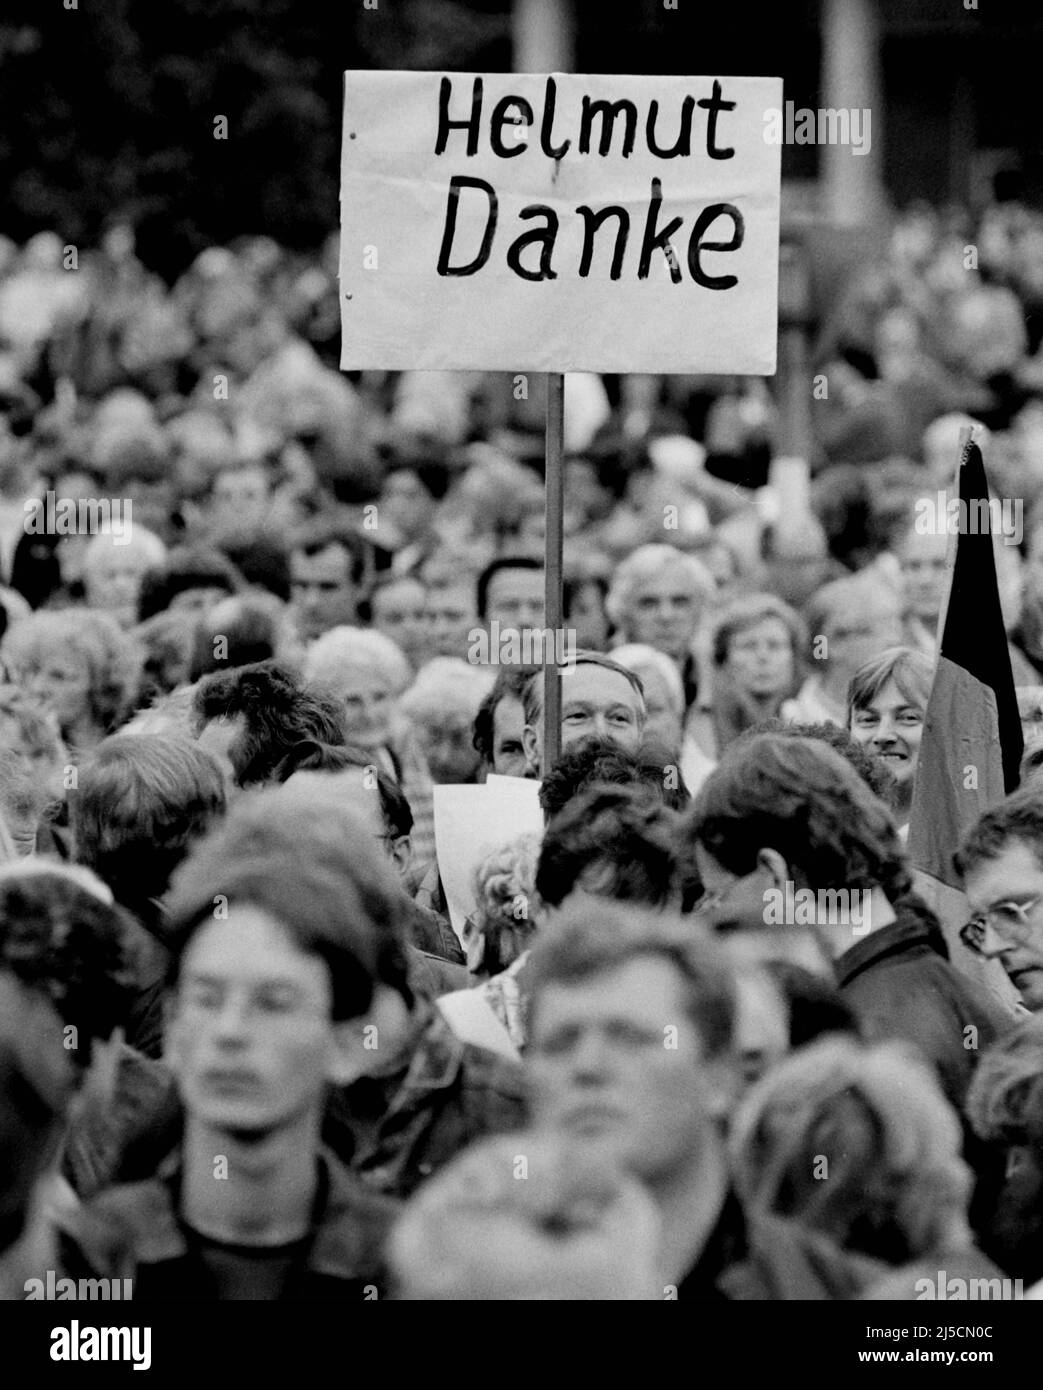 'Dresden, DEU, 09/16/1990 - Supporters of German Chancellor Helmut Kohl hold up a sign reading ''Helmut, thank you'' before the start of a CDU election campaign rally in Dresden. [automated translation]' Stock Photo